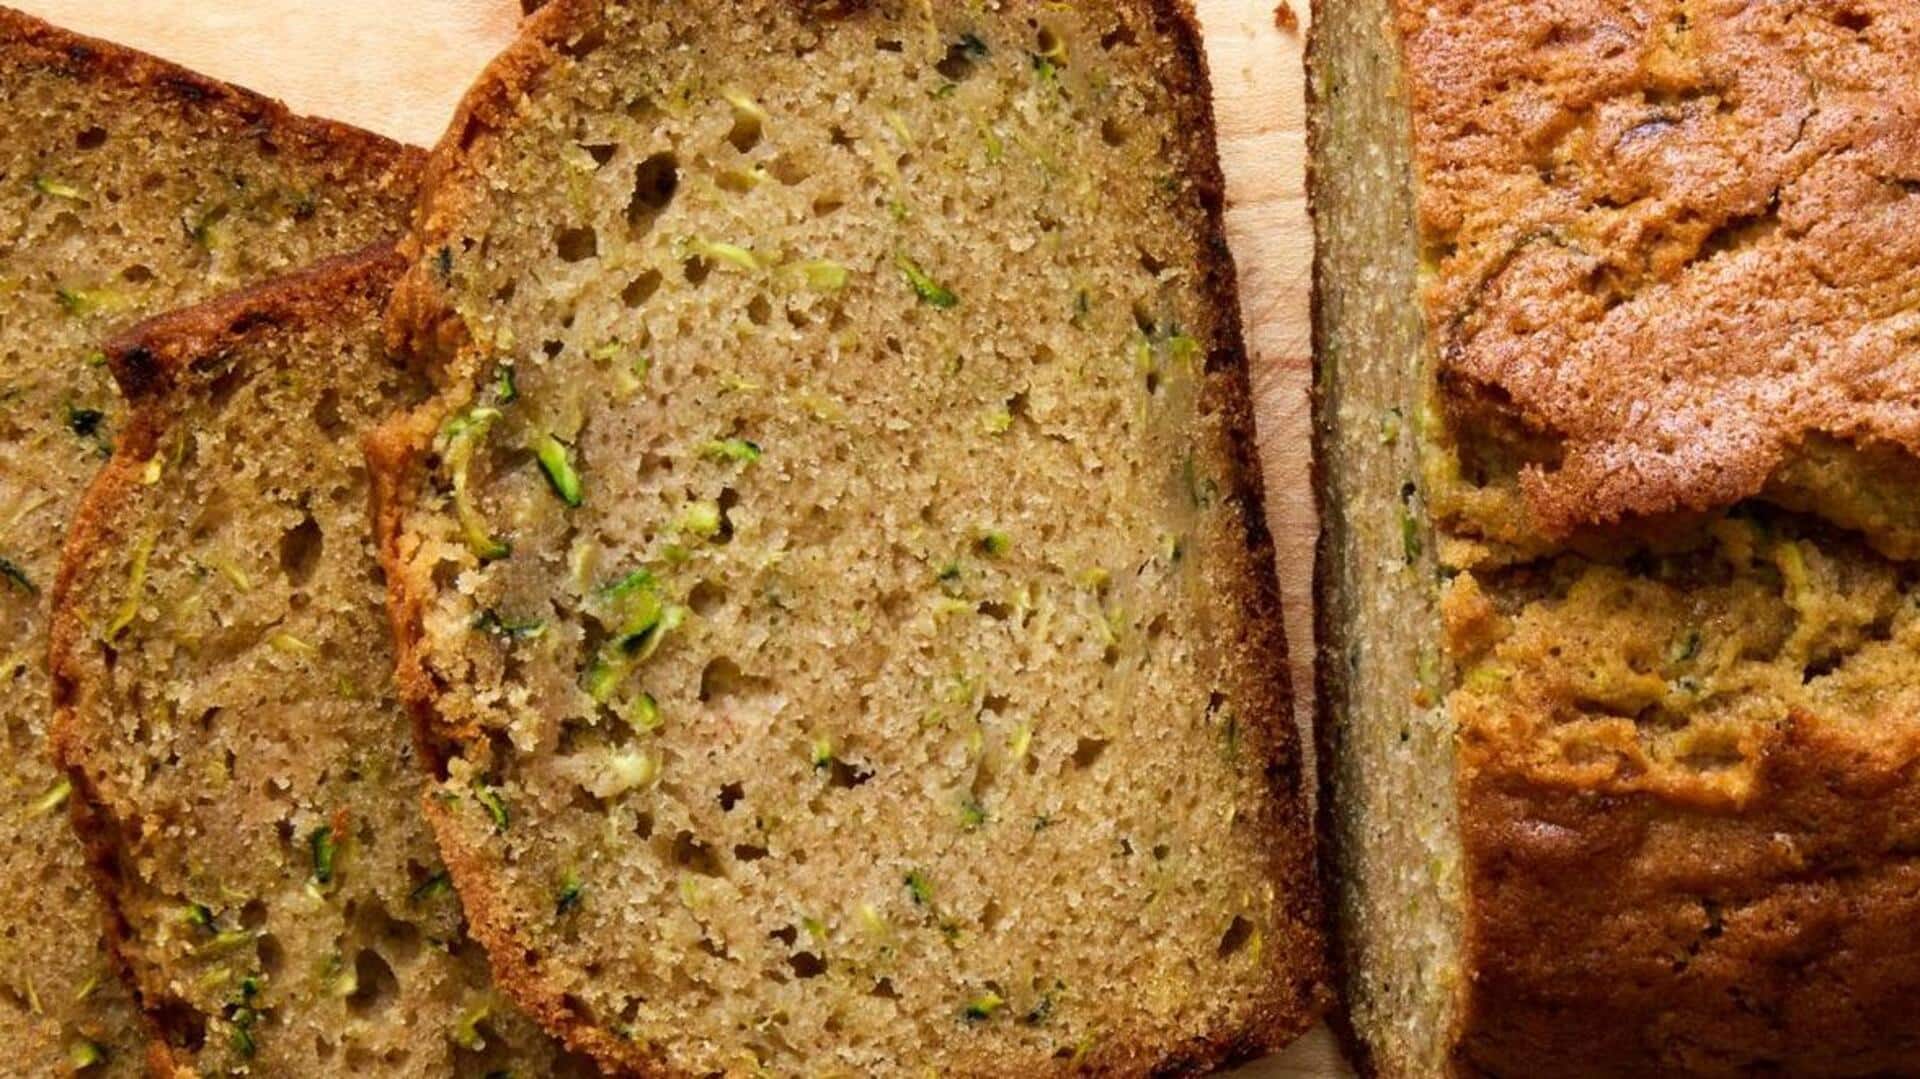 Add these zesty zucchini gluten-free breads to your daily diet